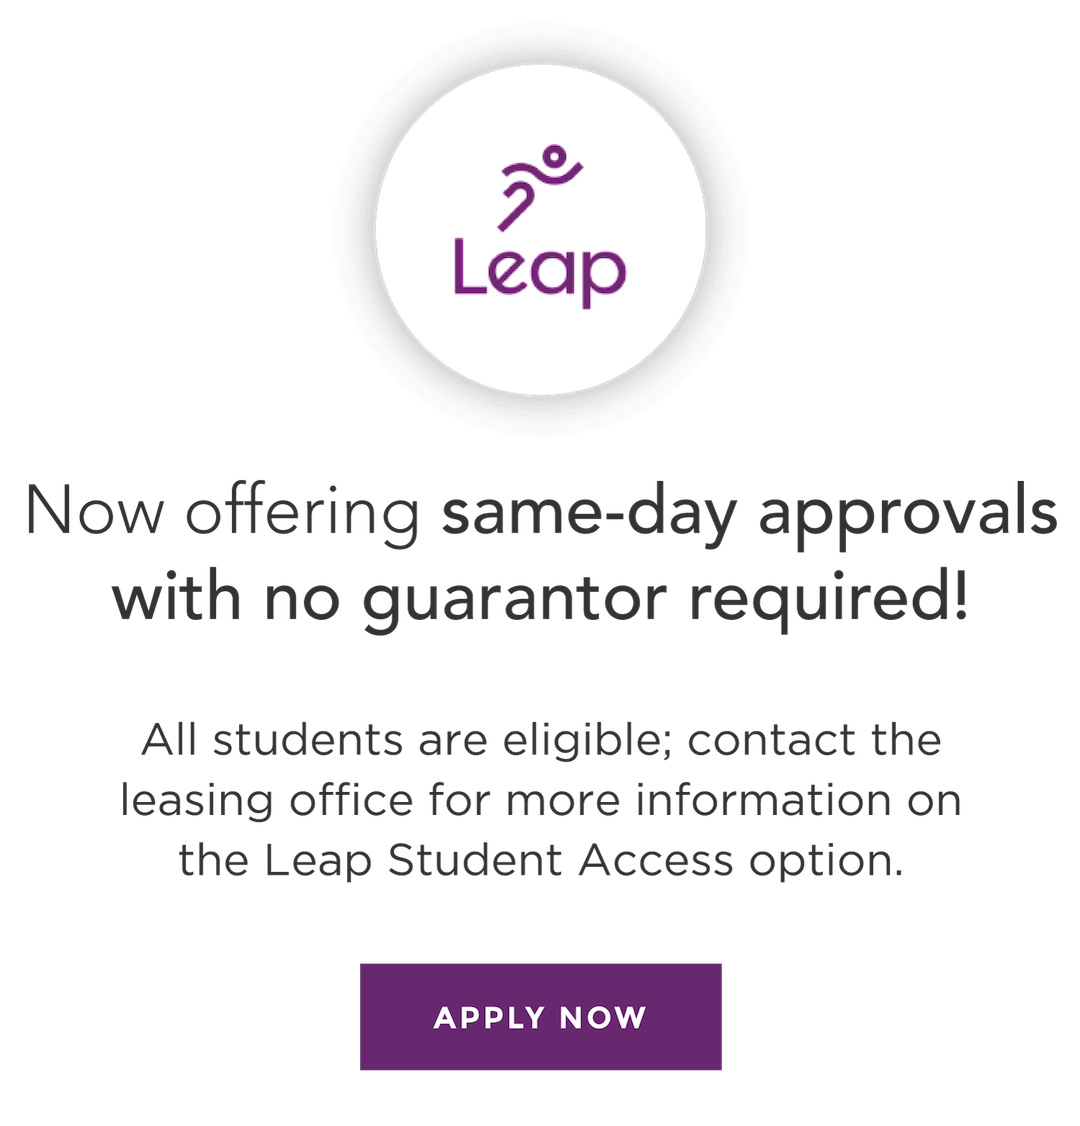 Now offering same-day approvals with no guarantor required! Apply Now.